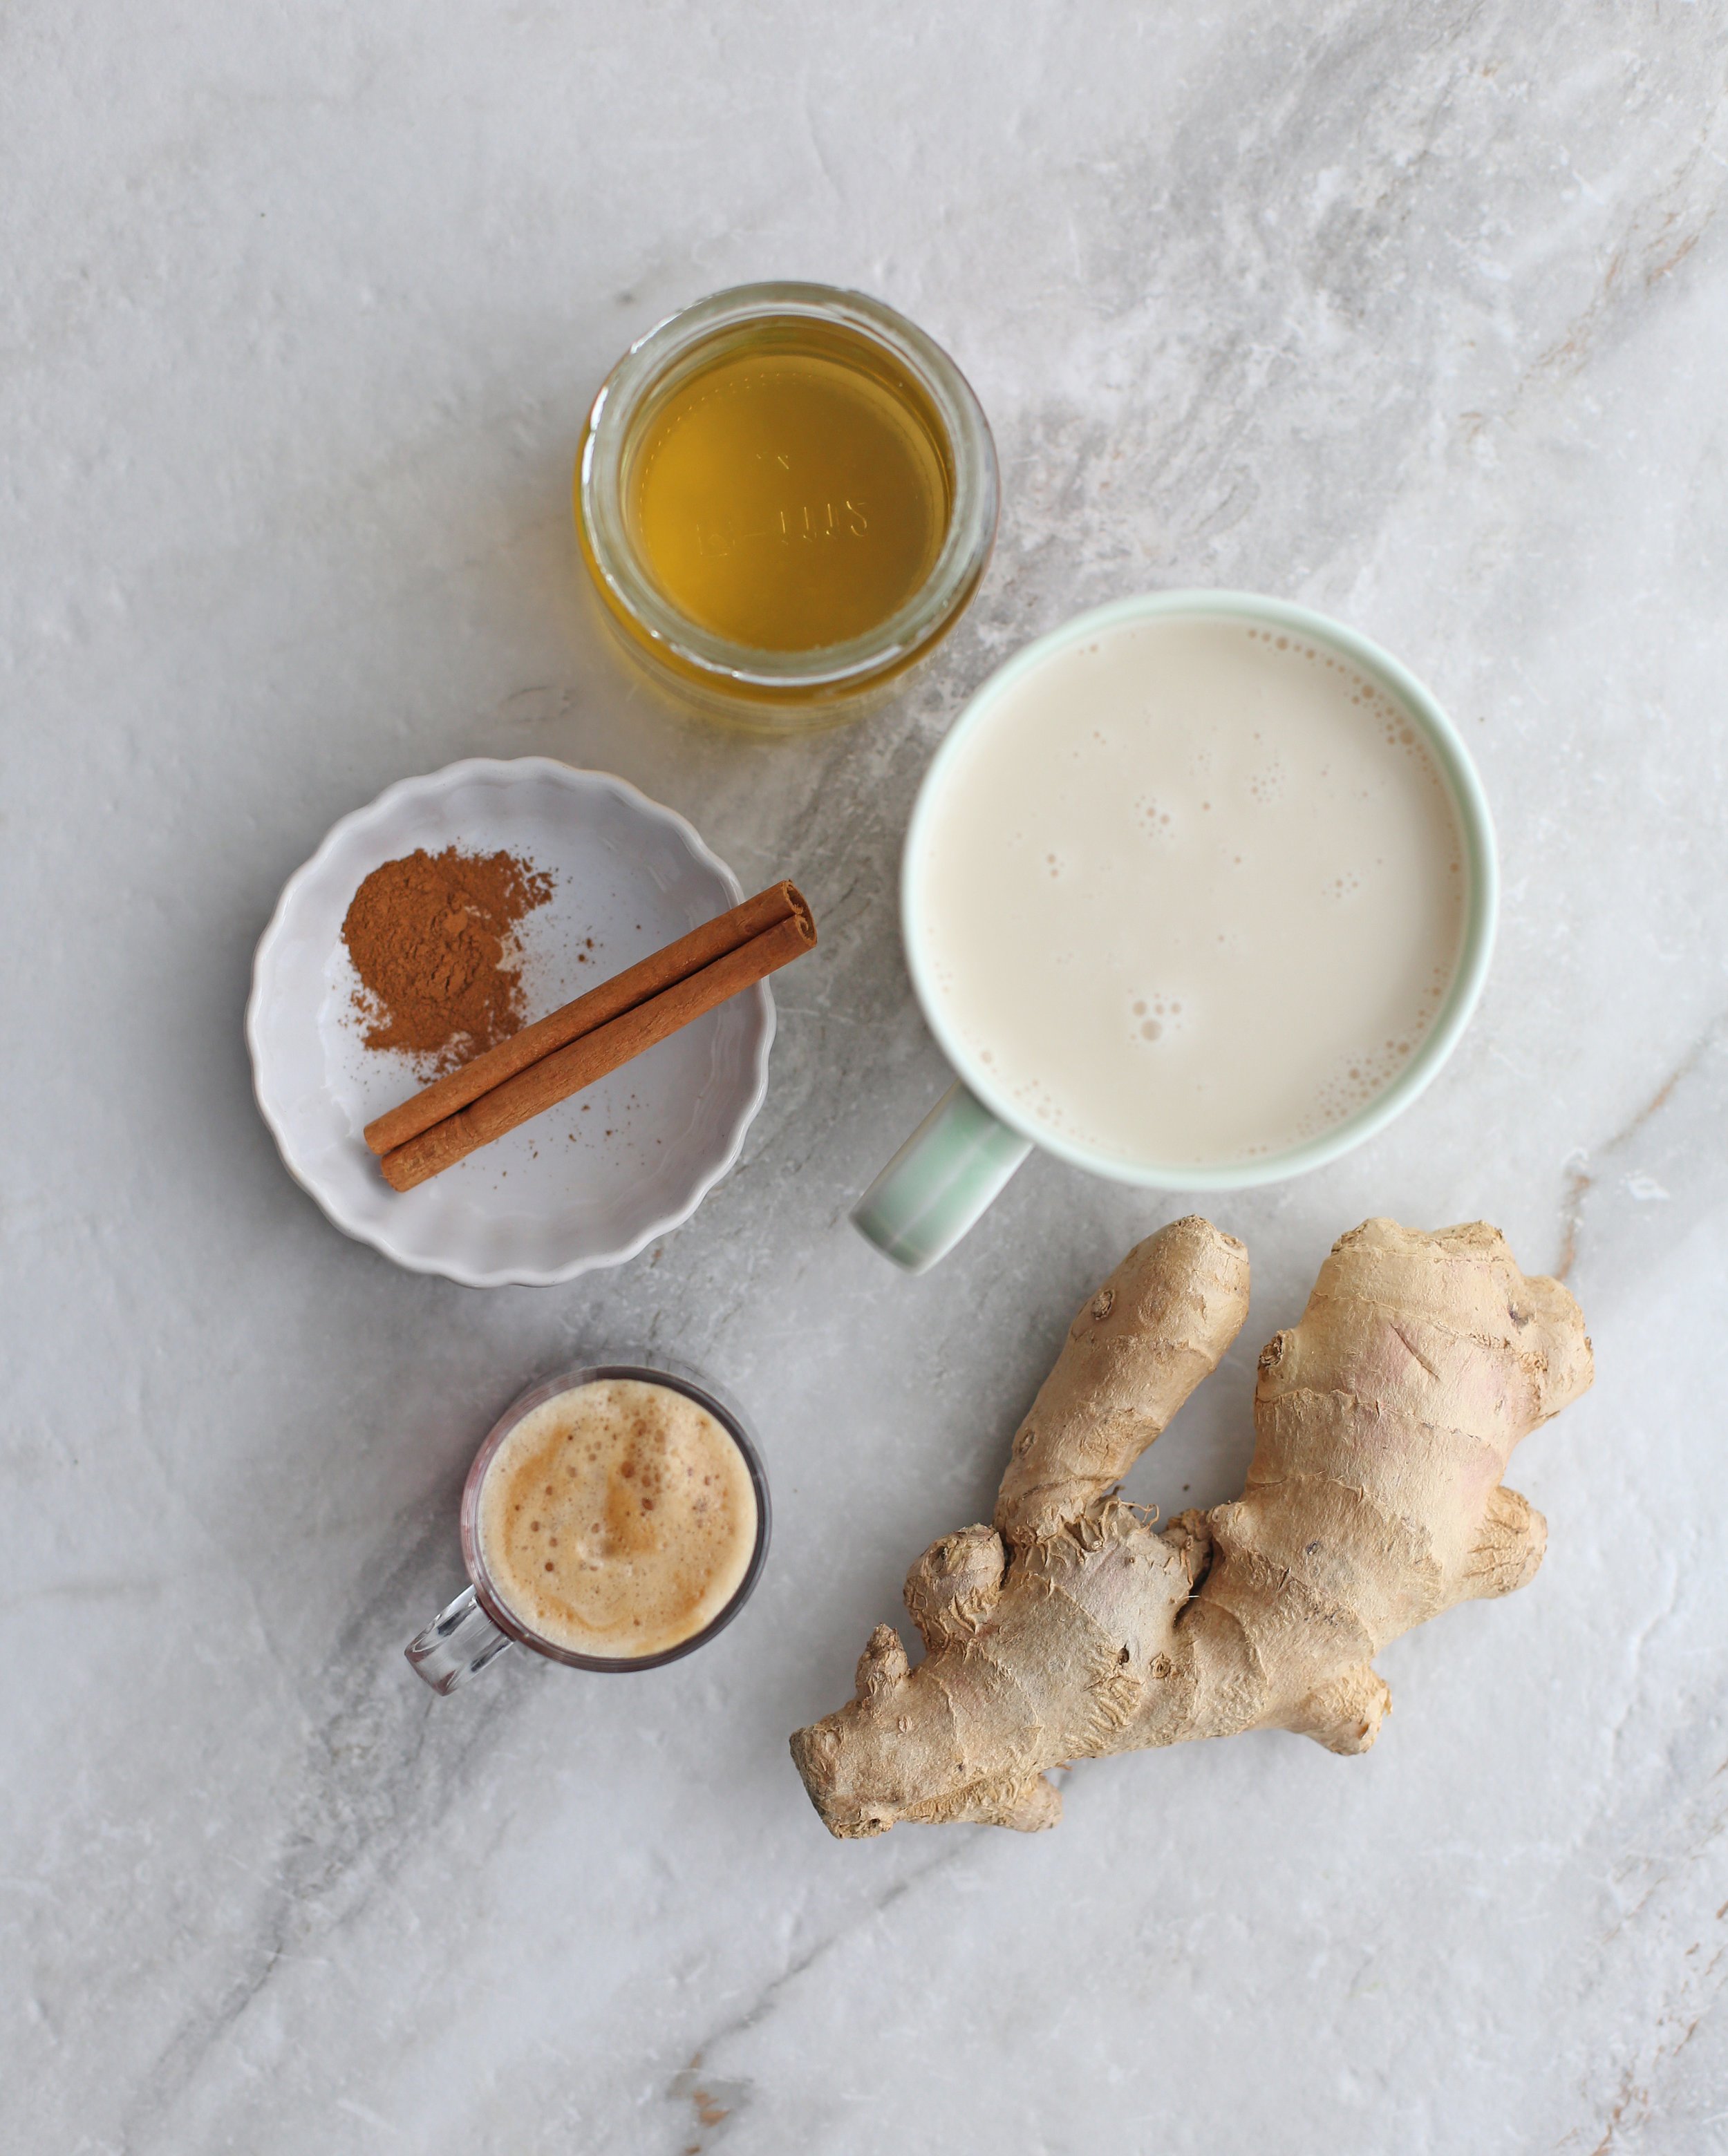 Overhead view of fresh ginger, honey, cinnamon stick, almond milk, and an espresso.